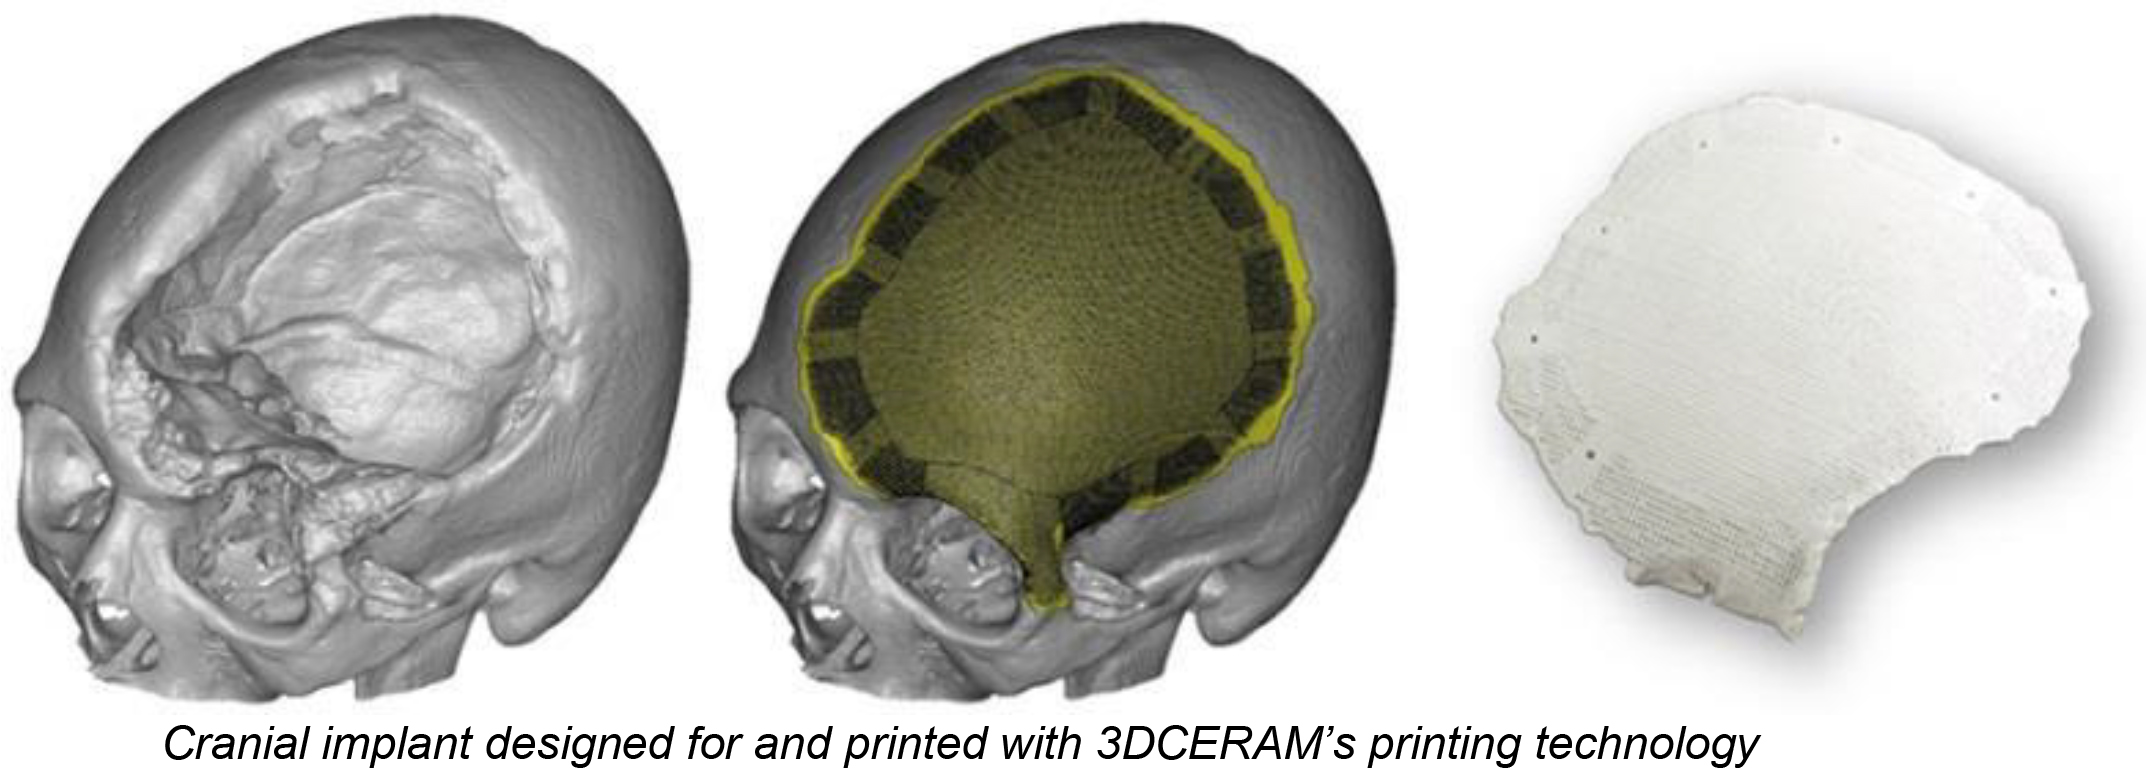 Cranial implant designed for and printed with 3DCERAM’s printing technology